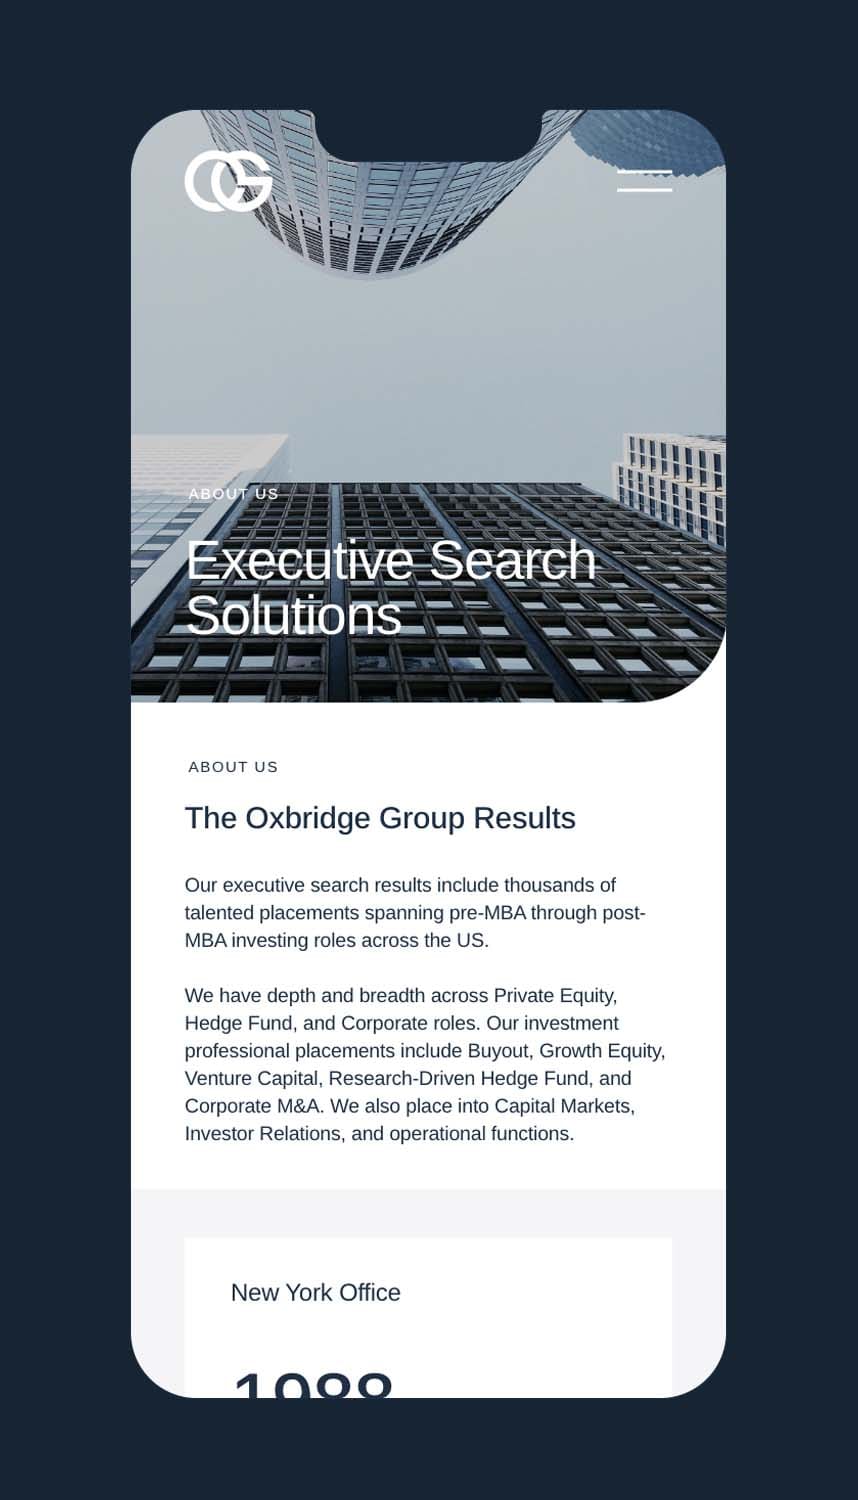 The Oxbridge Group - Executive Search web design Mobile Screen - About Us